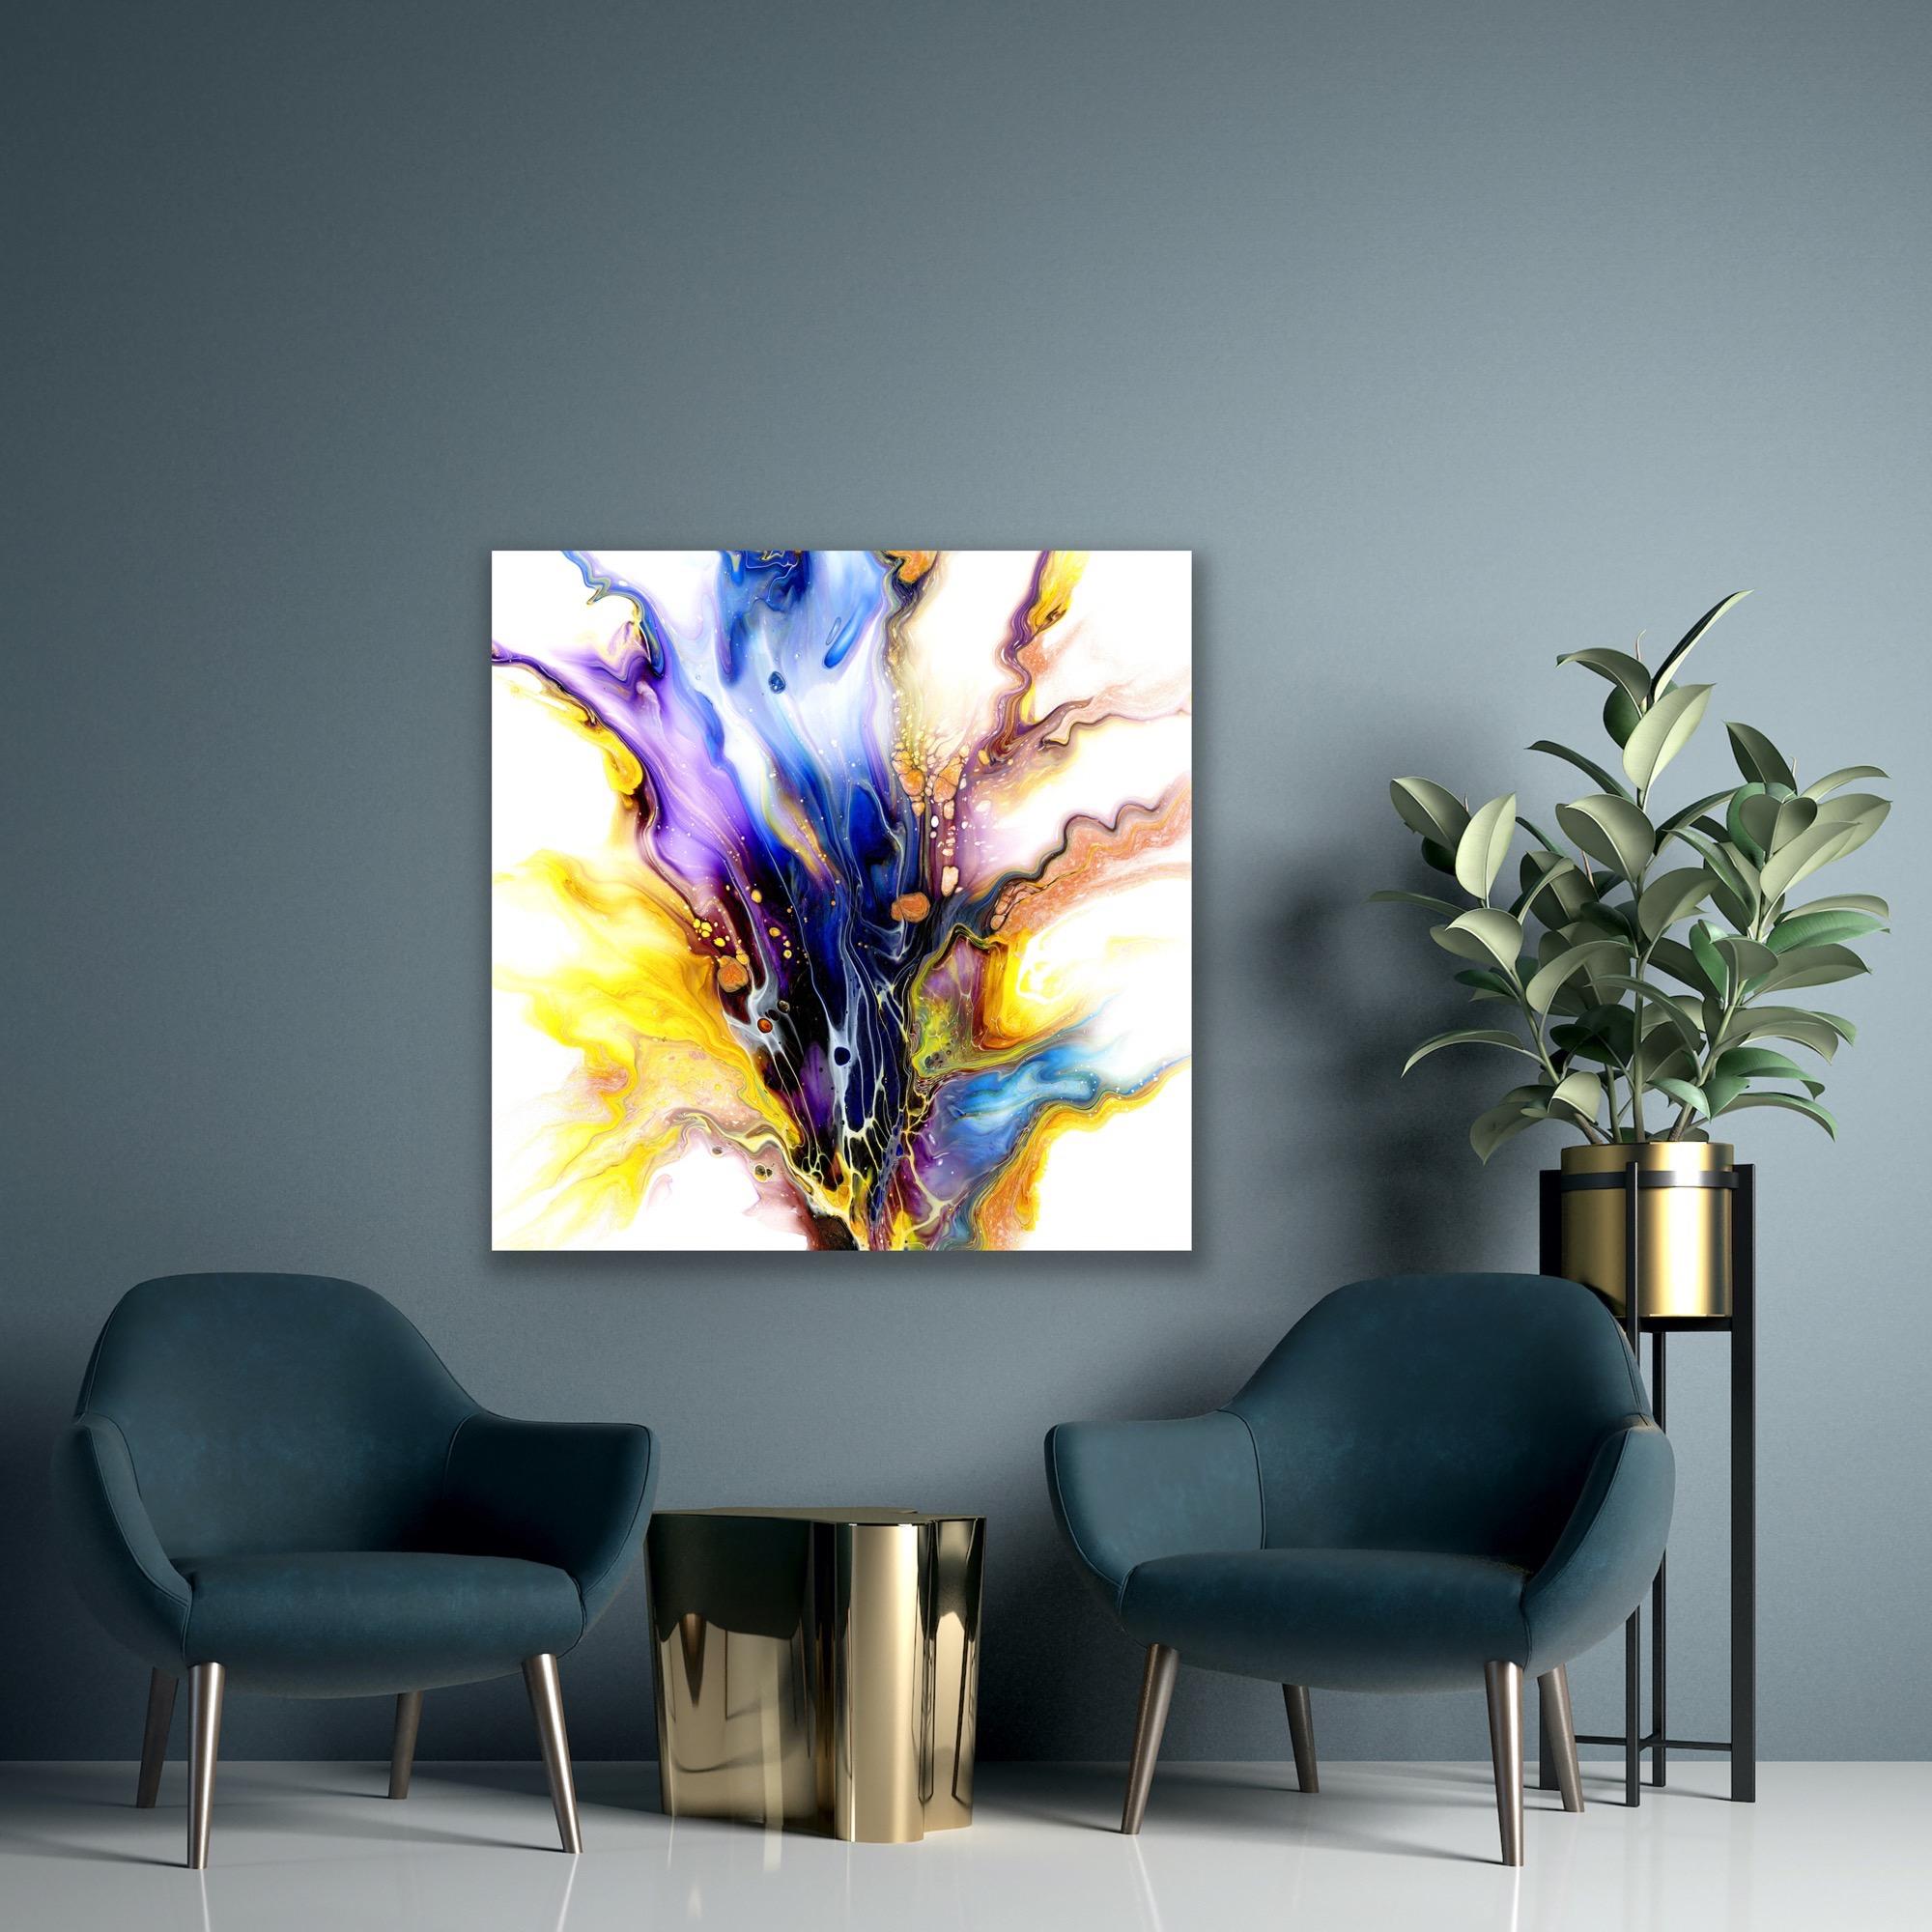 Giclee Print on Metal, Modern Abstract Painting by Celeste Reiter, LE Signed For Sale 3